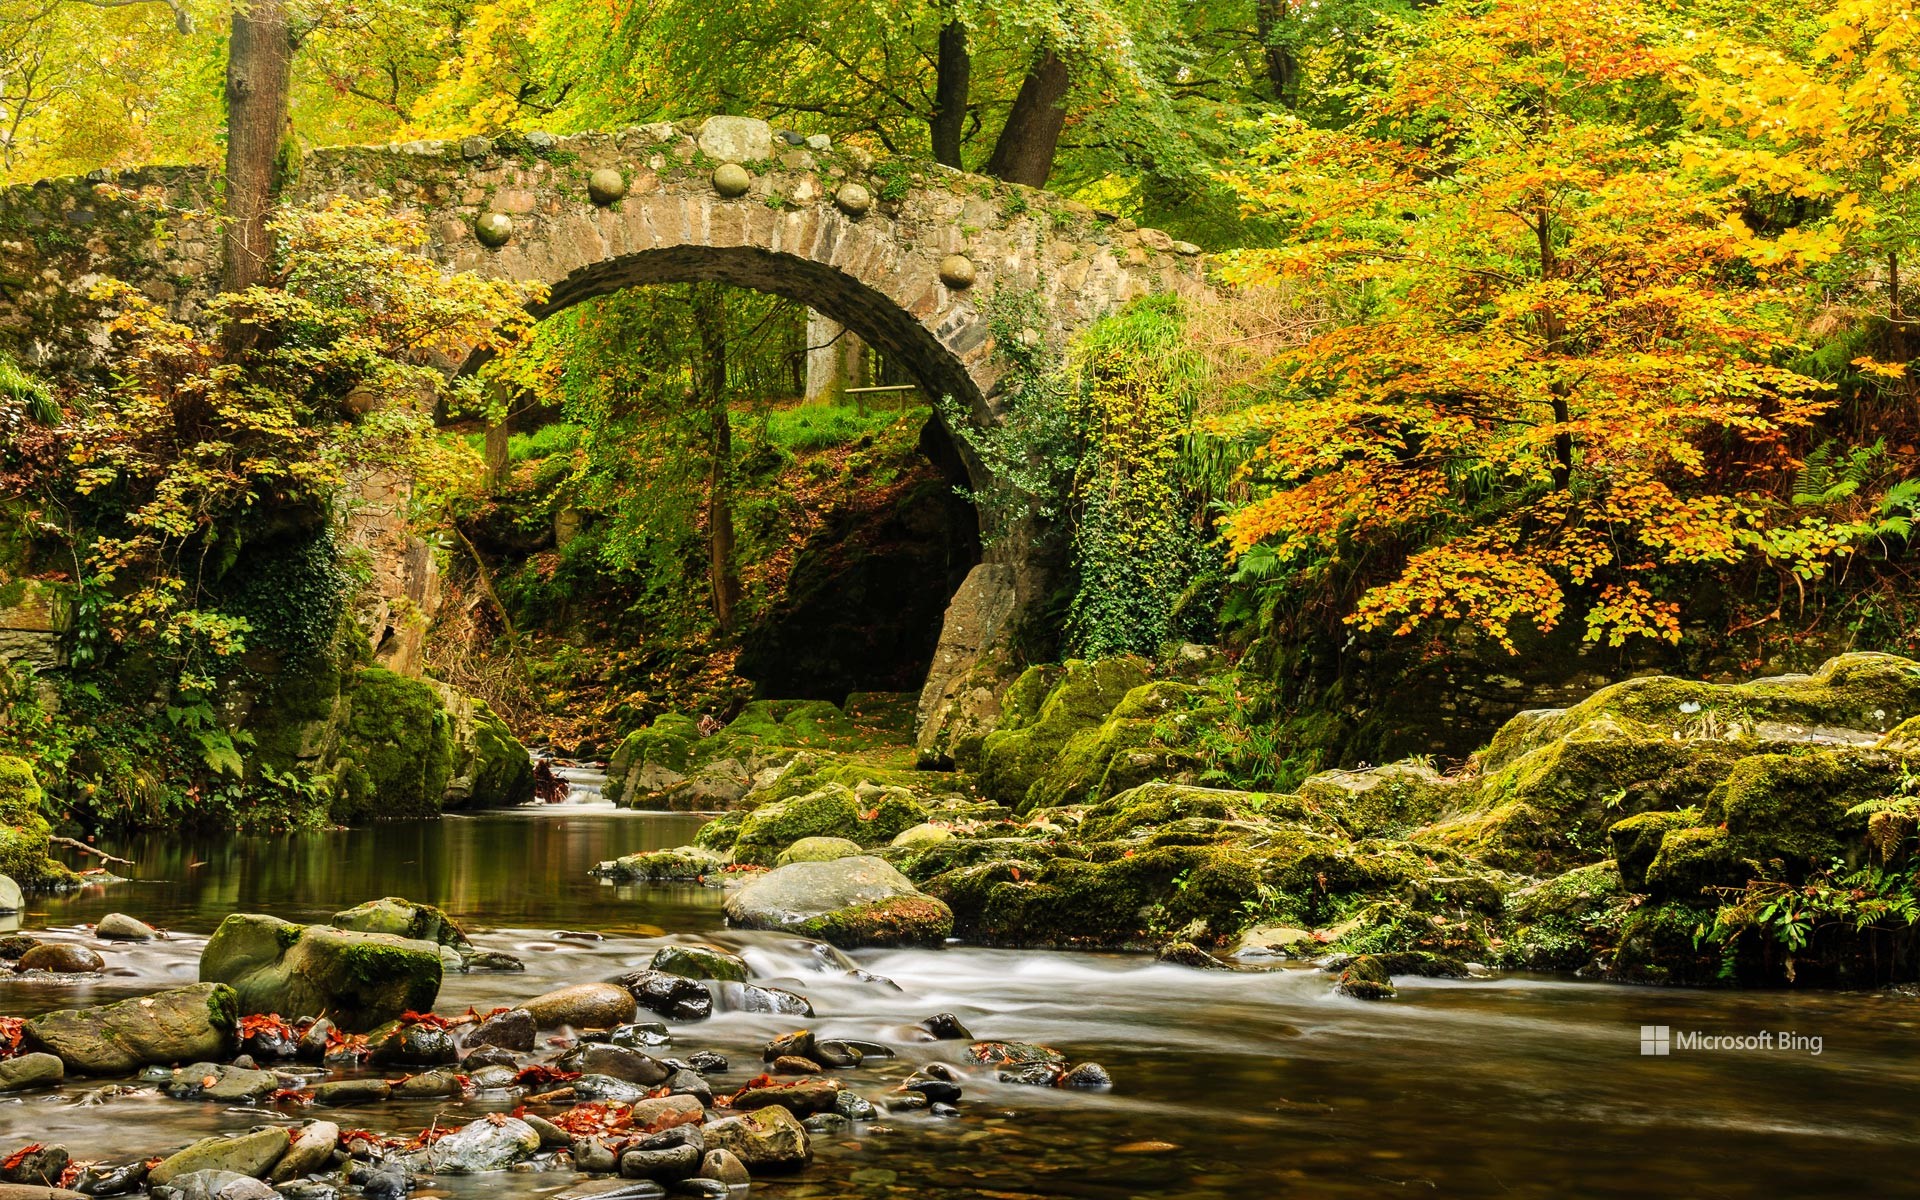 Foley's Bridge over the Shimna River in Tollymore Forest Park in County Down.